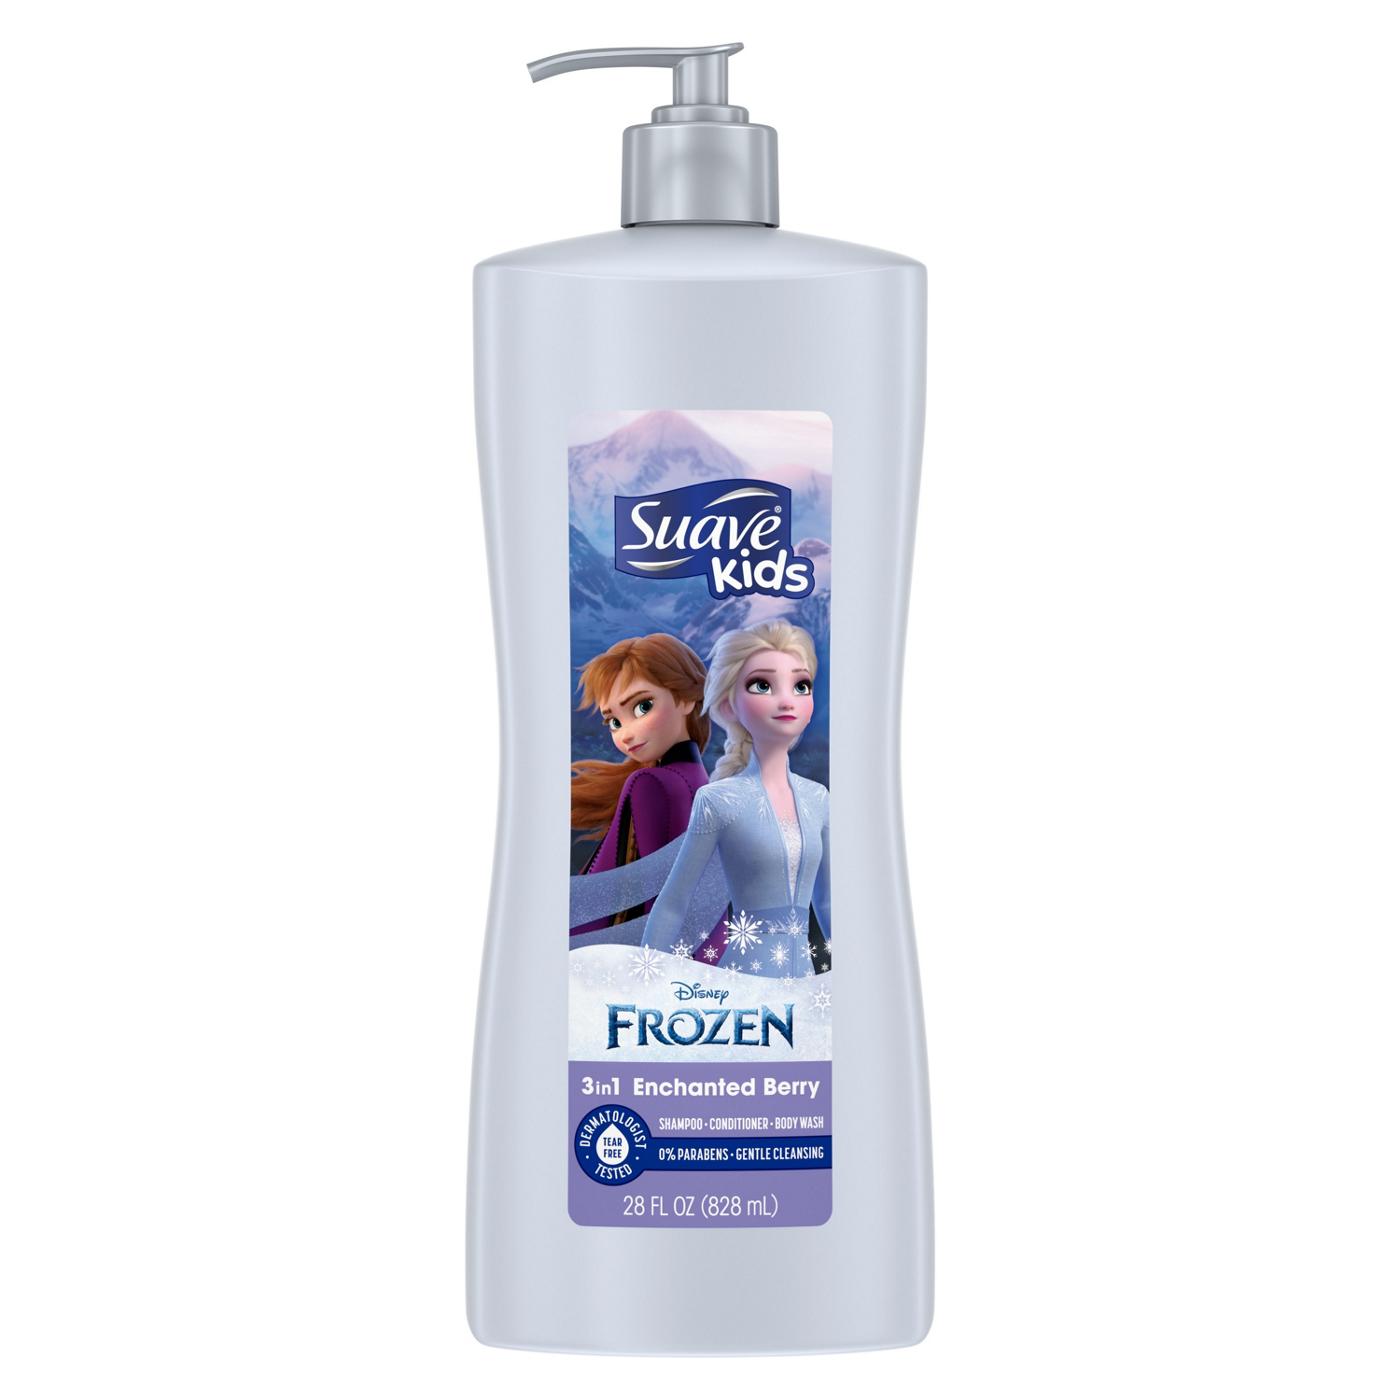 Suave Kids Frozen 3-in-1 Shampoo + Conditioner + Body Wash - Enchanted Berry; image 1 of 6